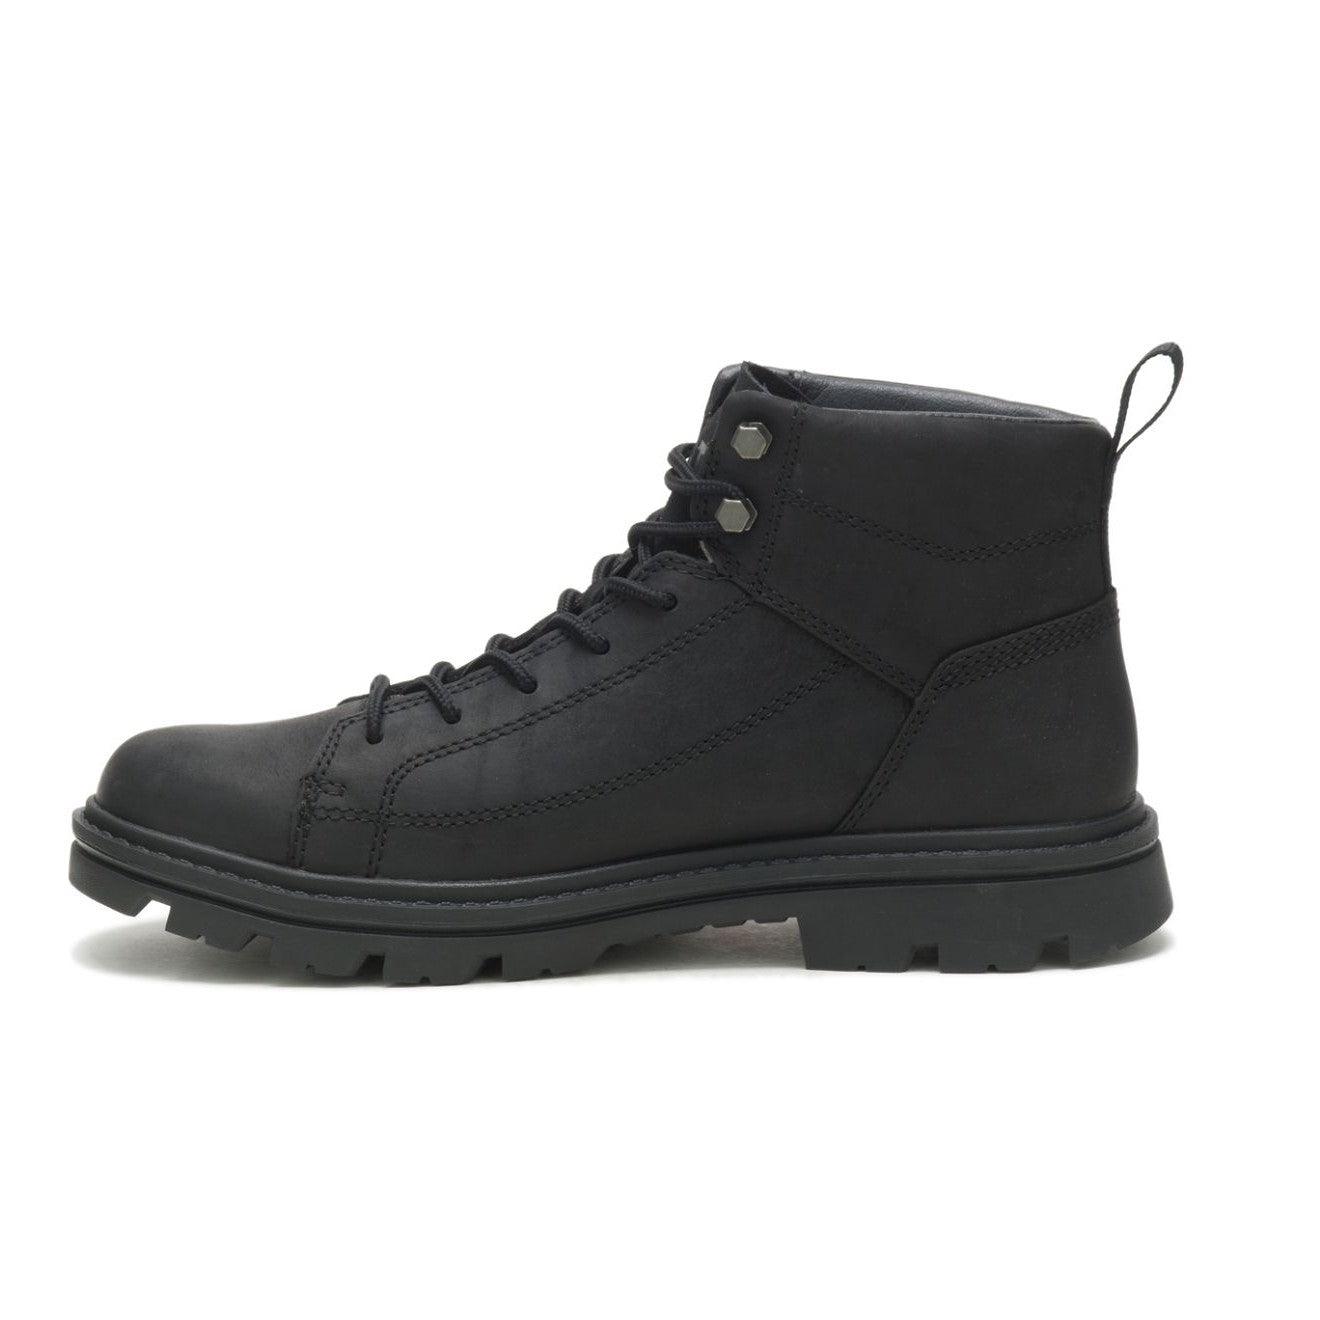 Modulate Waterproof Boot - {{ collection.title }} - TIT